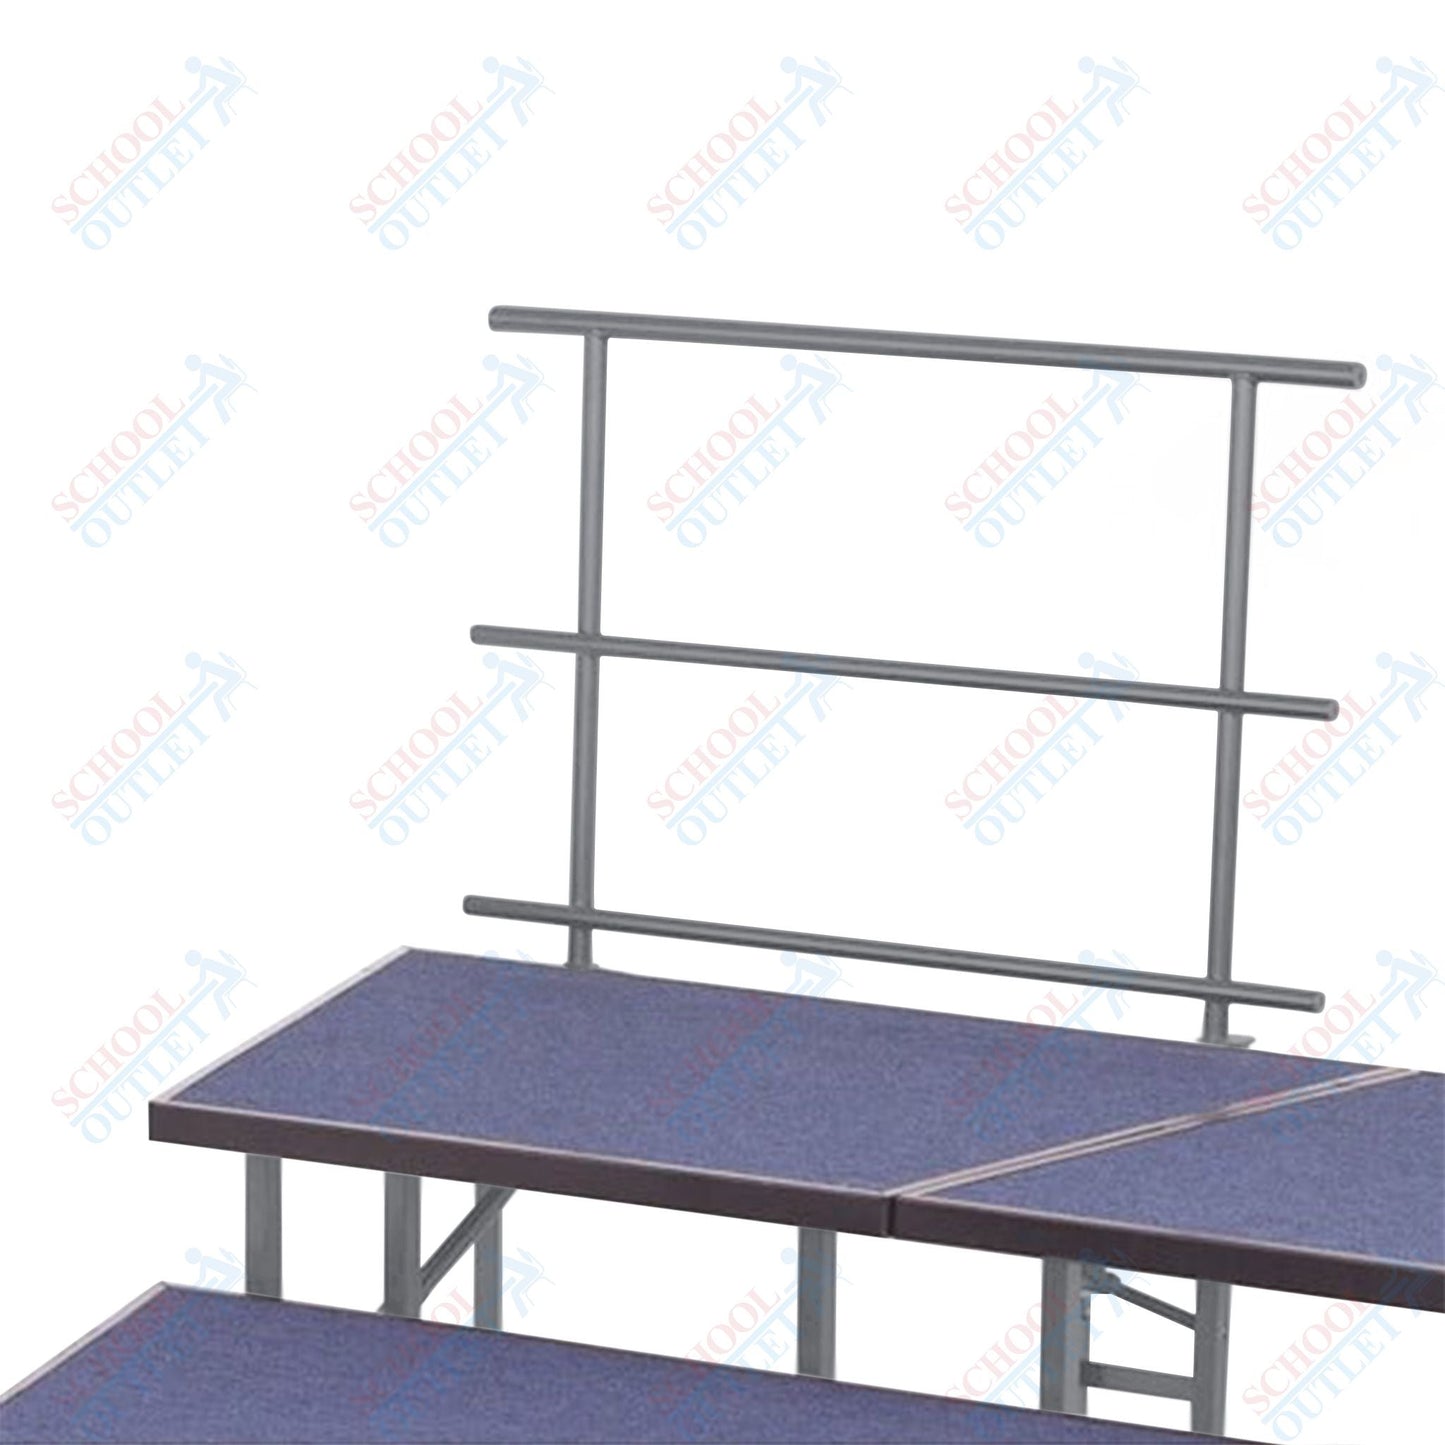 AmTab Stage and Riser Guard Rail - Chair Stop - 46"W x 31"H (AmTab AMT-STGR48) - SchoolOutlet